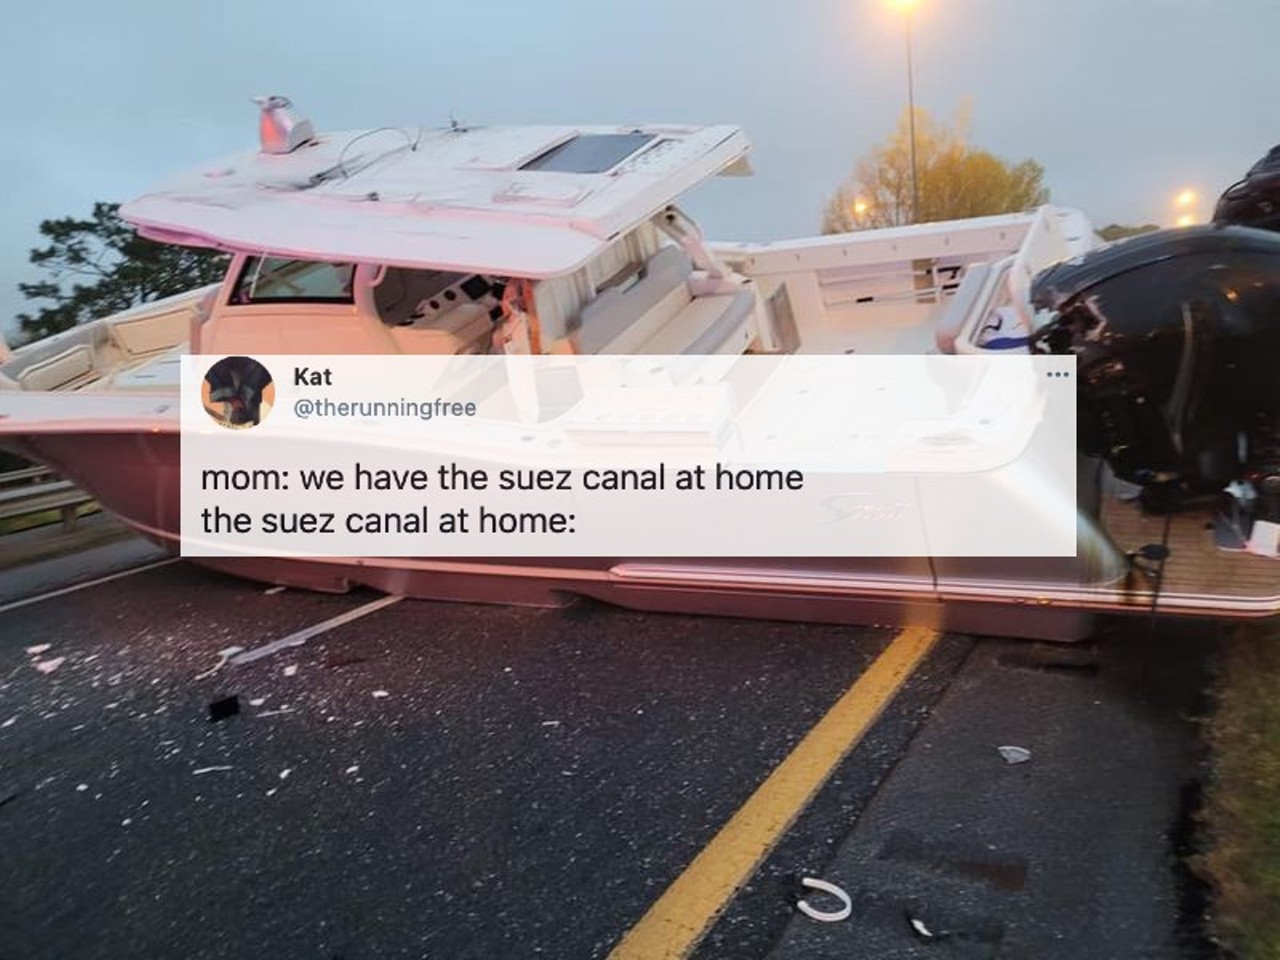 Everyone's roasting this Florida boat, which also got stuck somewhere inconvenient